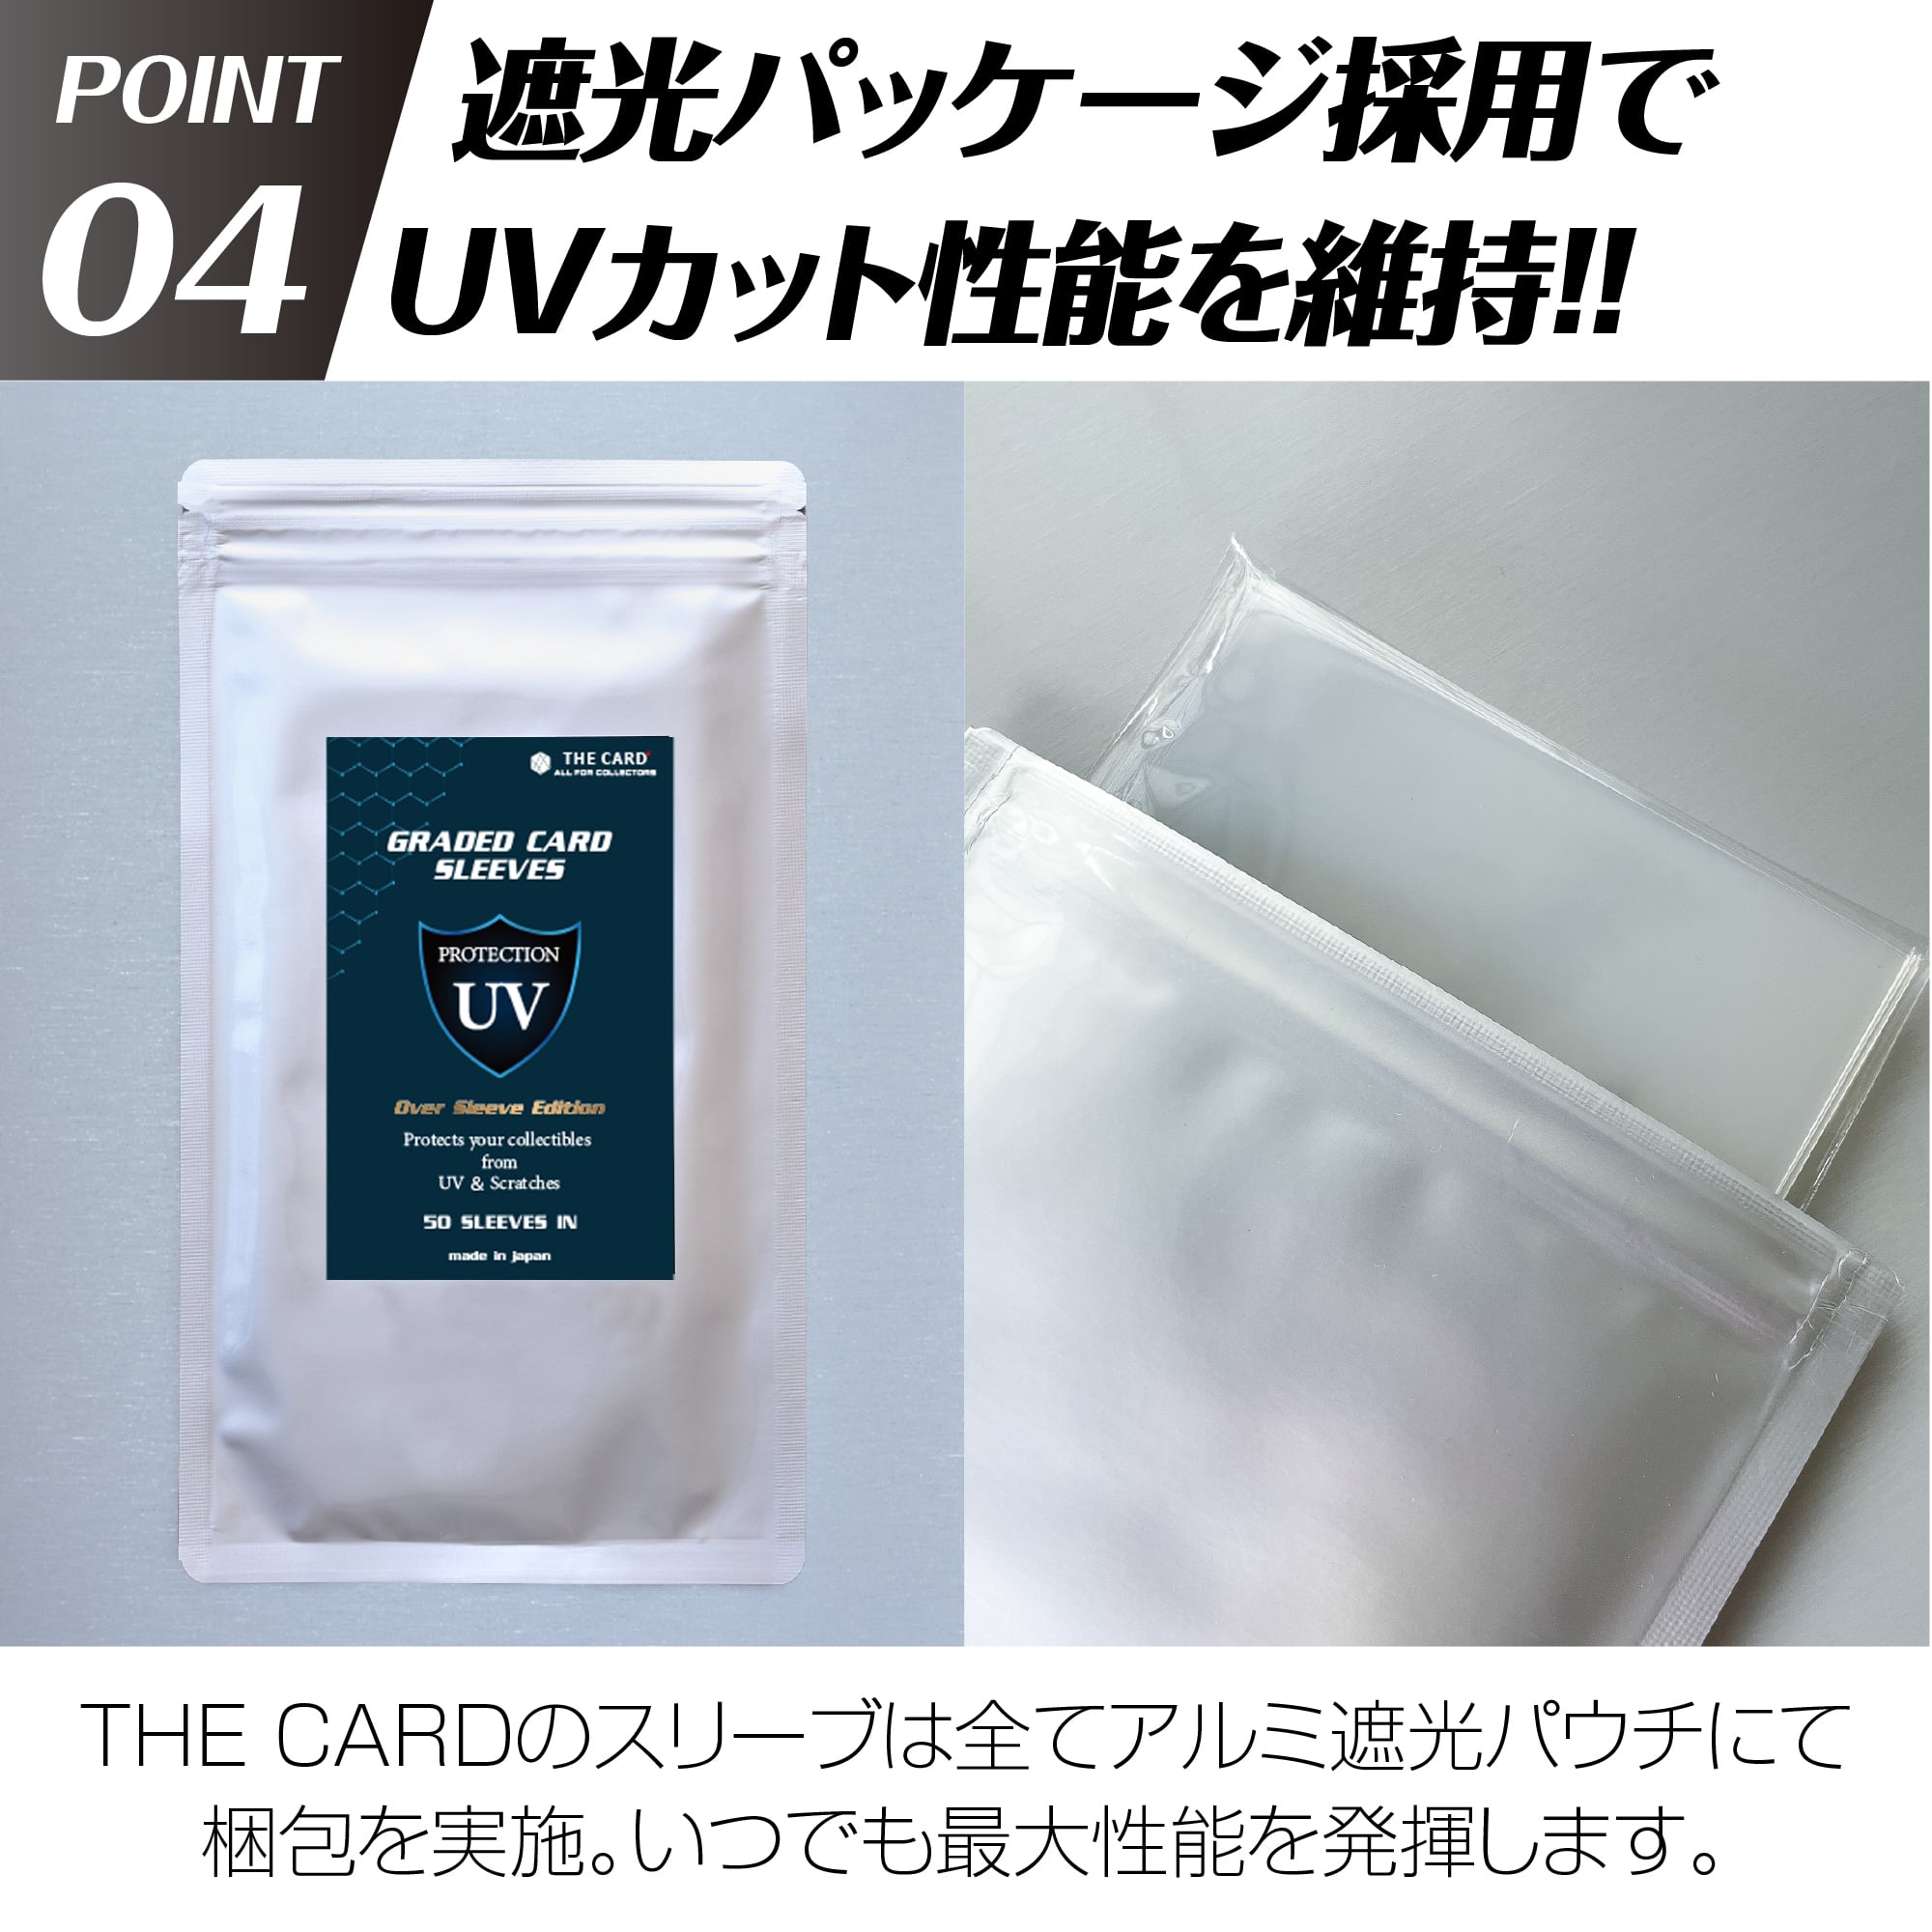 PSA専用UVカットオーバースリーブ 50枚入 THE CARD ALL FOR COLLECTORS